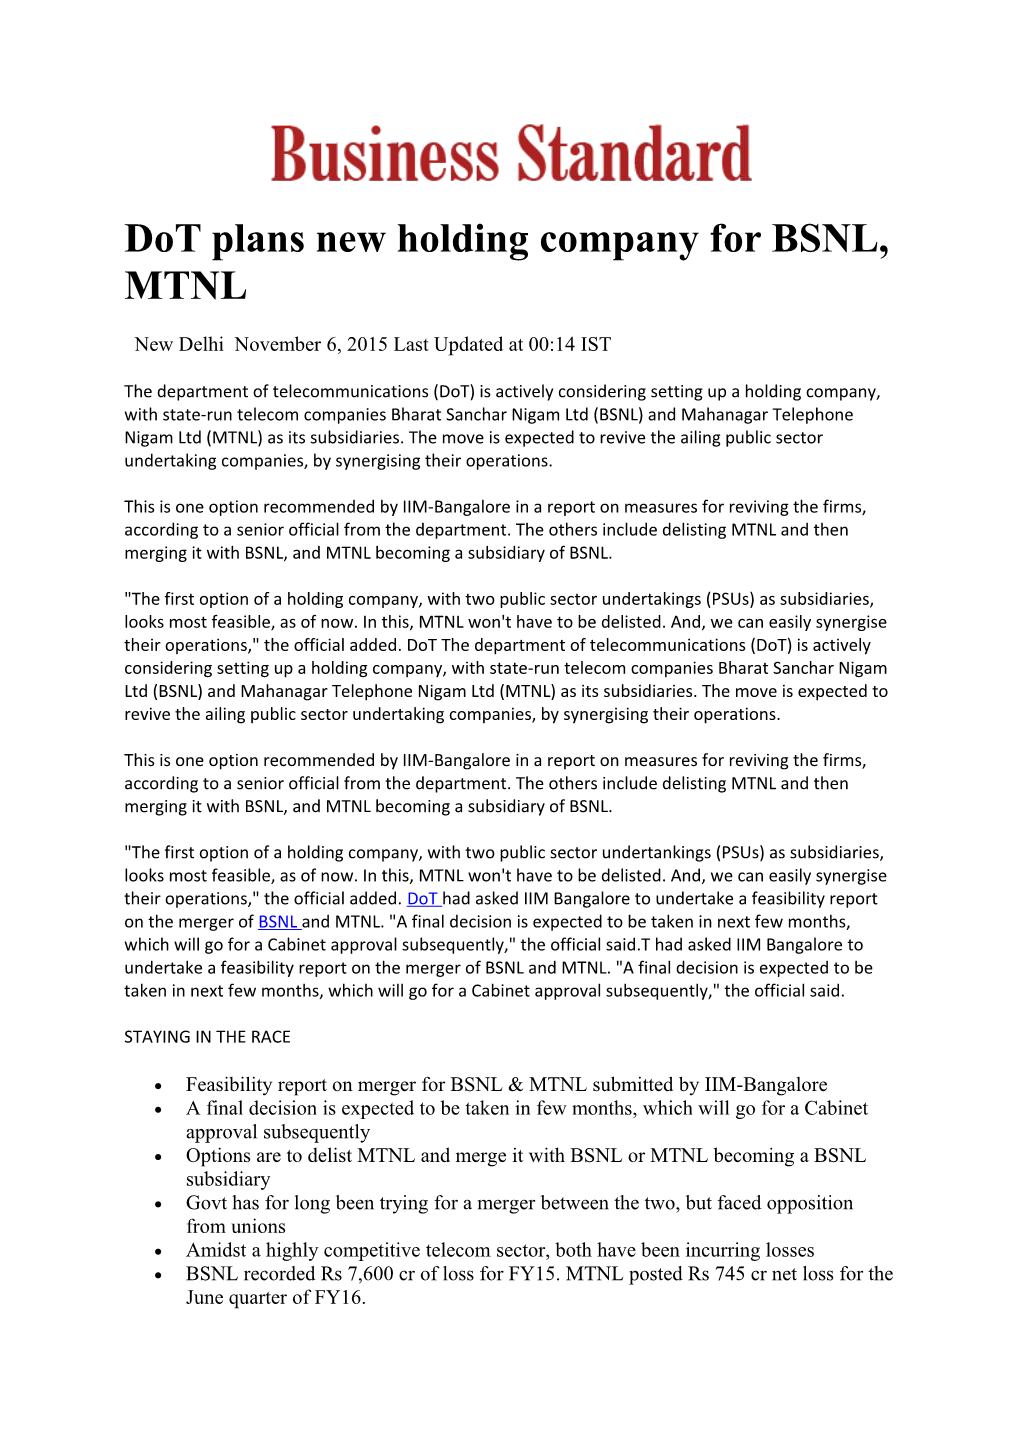 Dot Plans New Holding Company for BSNL, MTNL